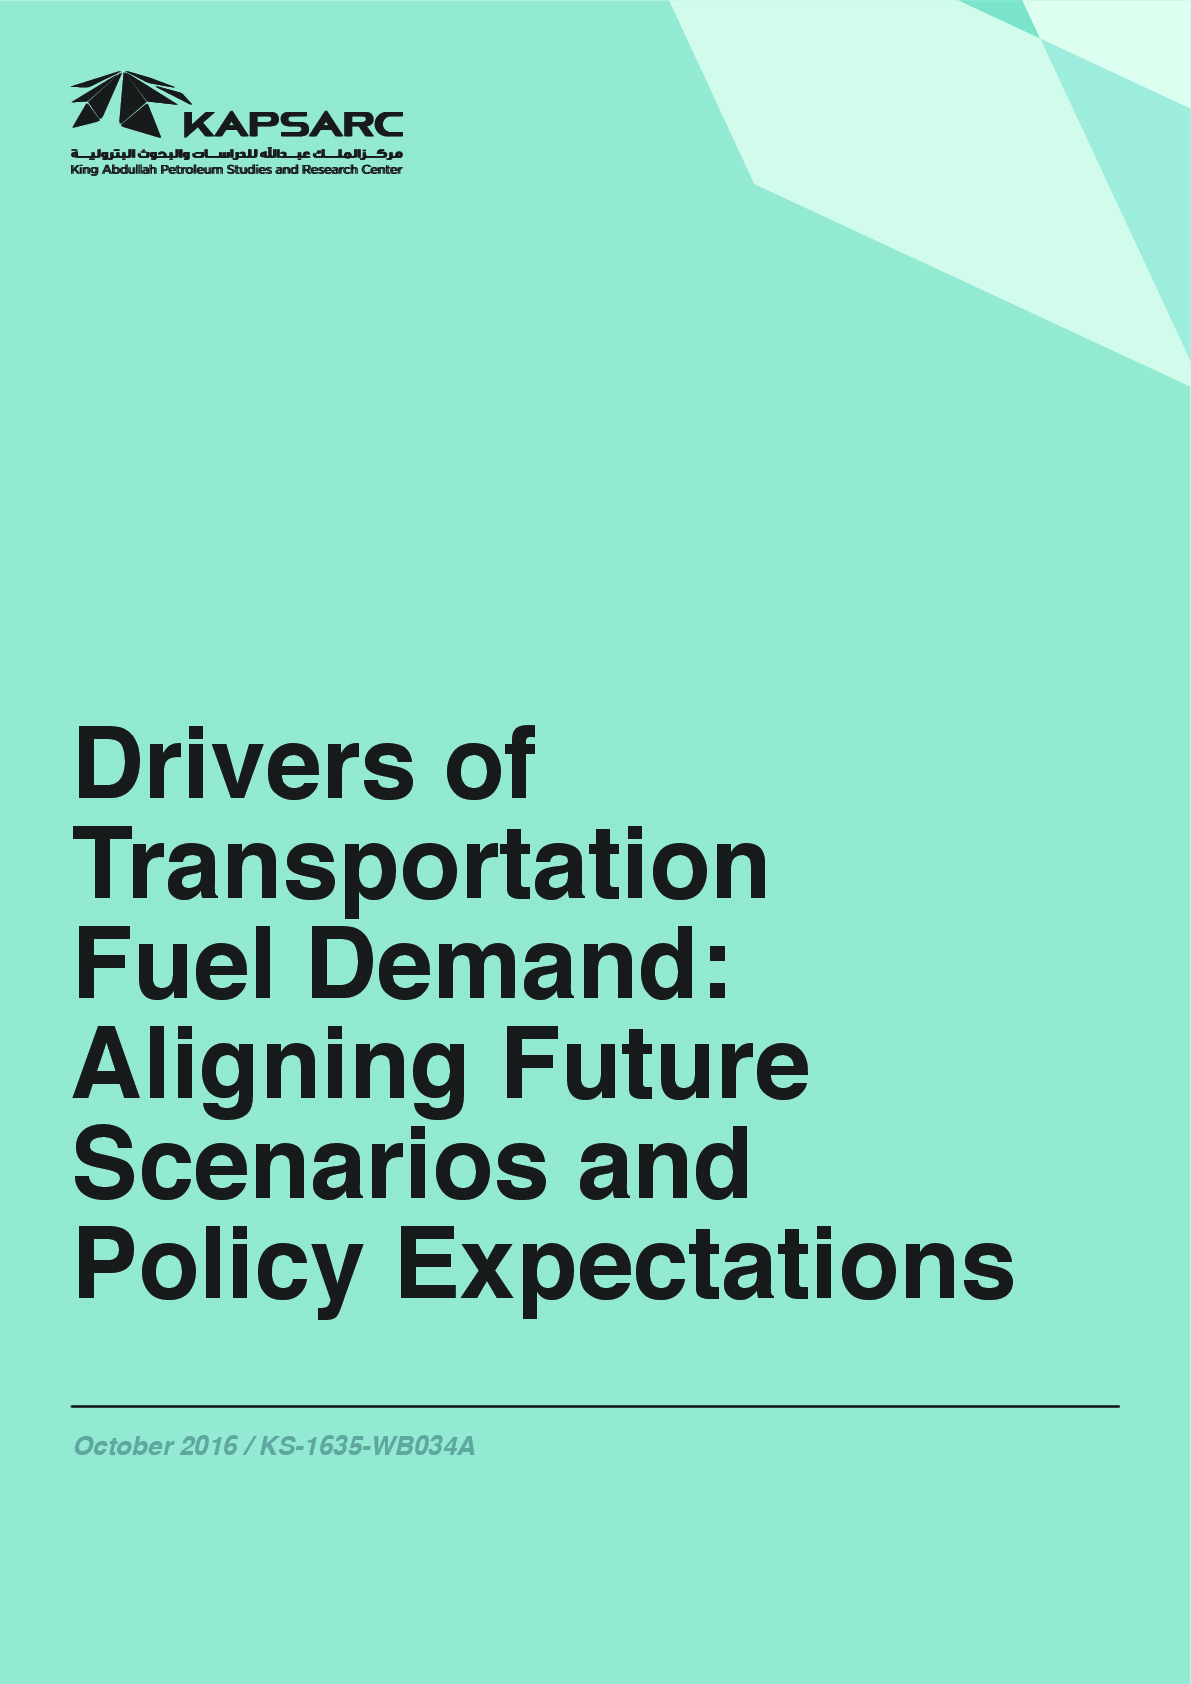 Drivers of Transportation Fuel Demand: Aligning Future Scenarios and Policy Expectations